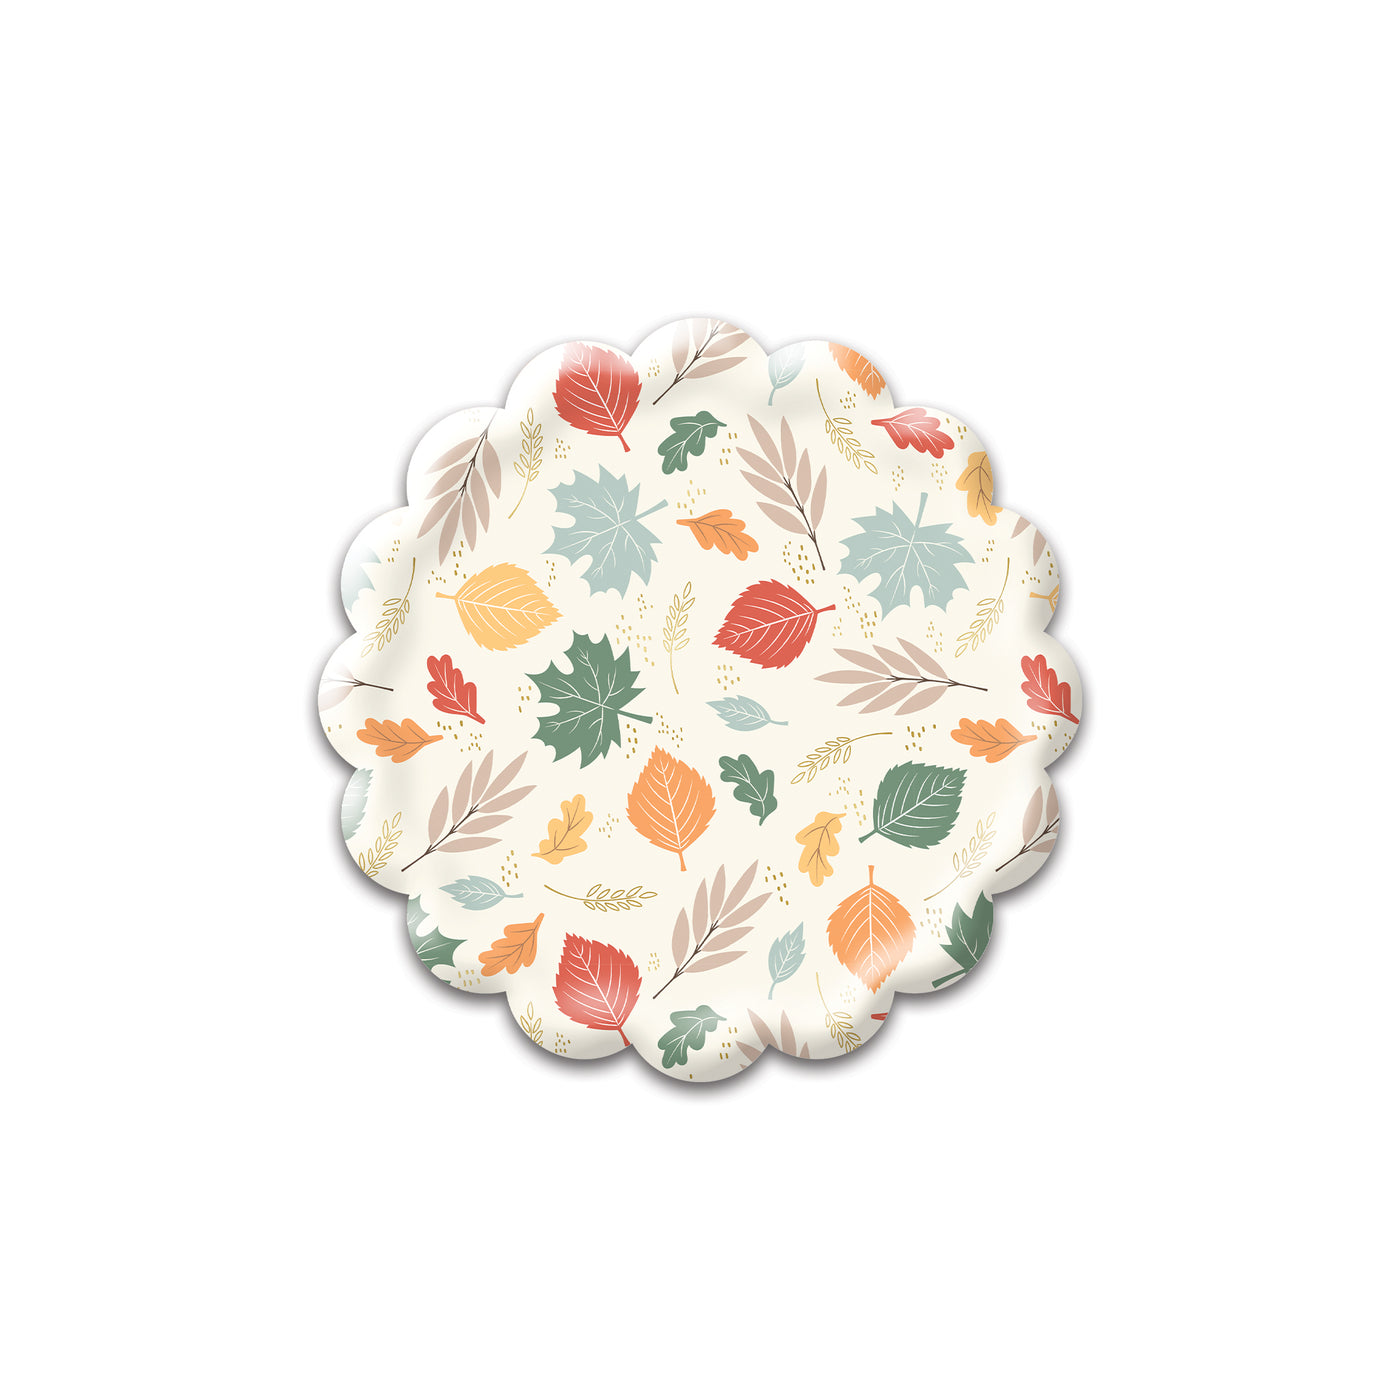 PLTS378D - Scattered Leaves Paper Plates